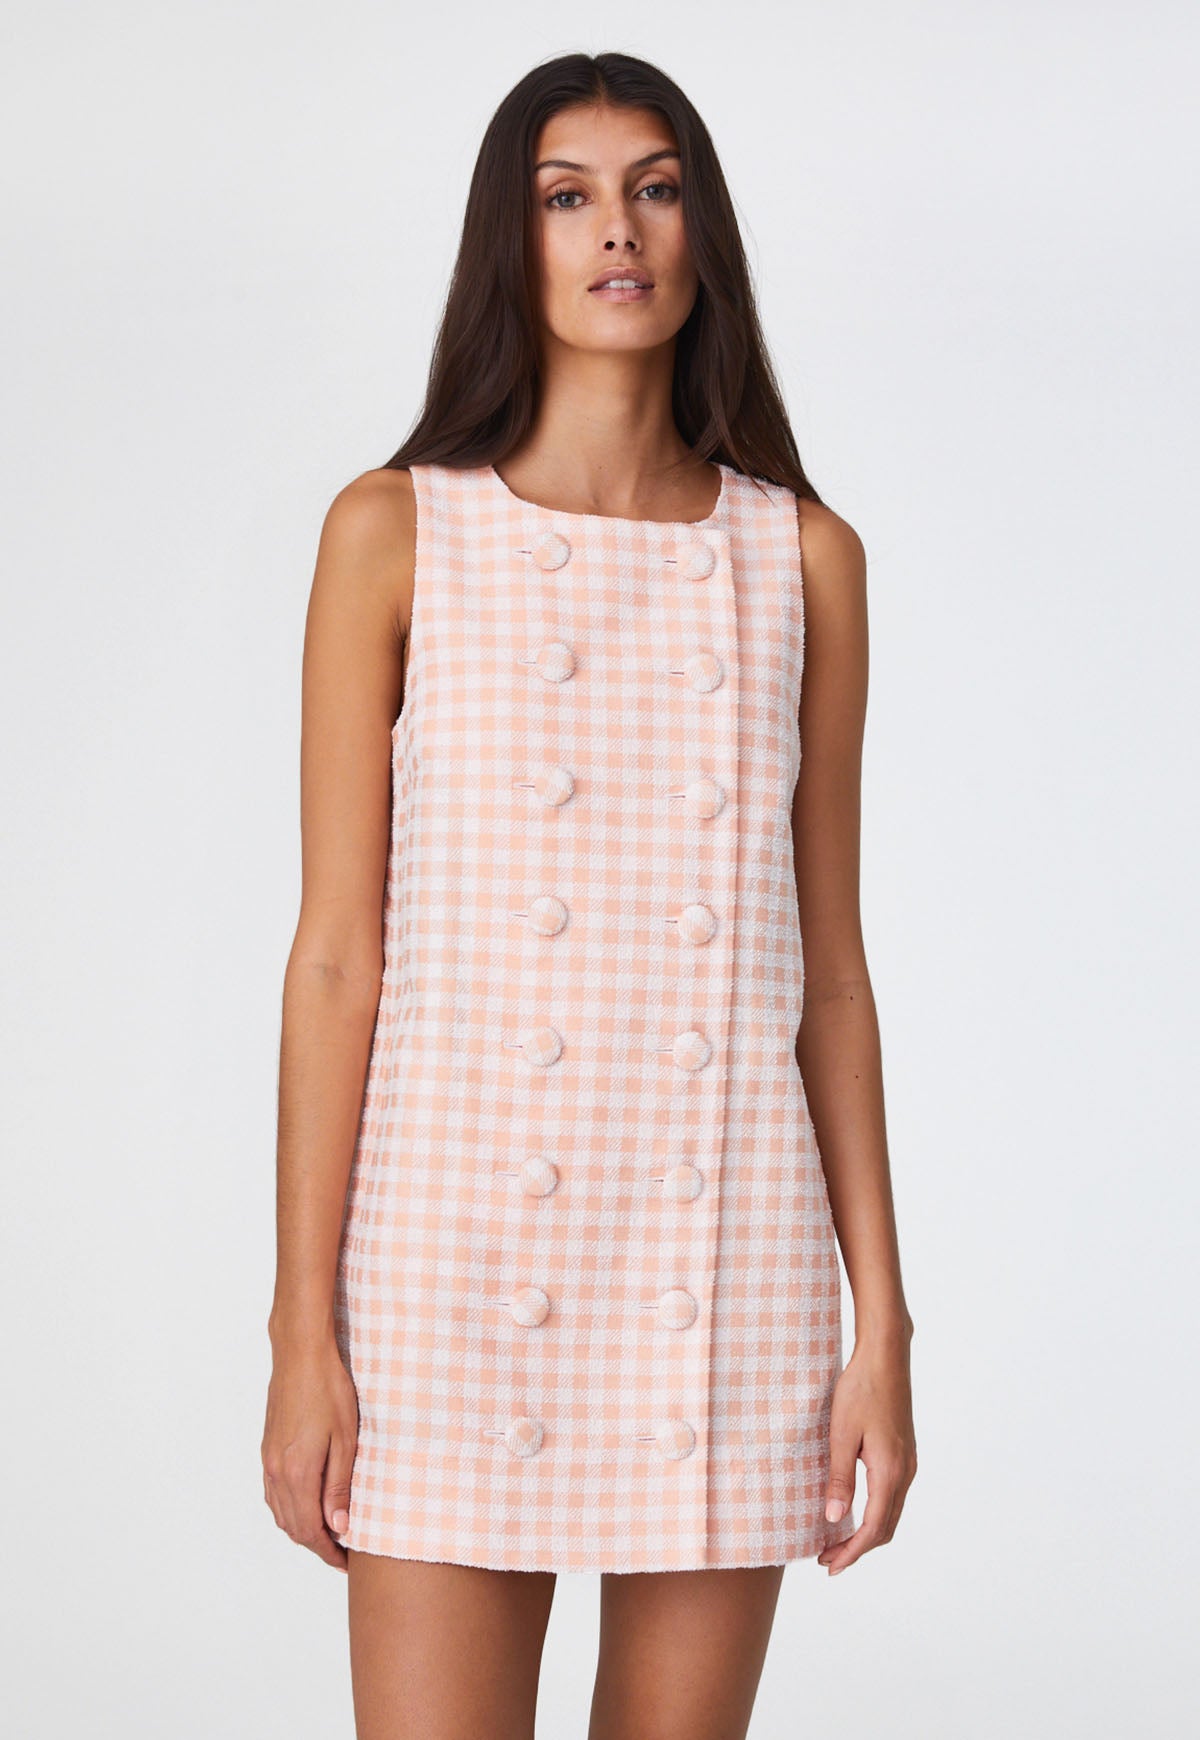 THE DOUBLE BREASTED MINI DRESS in CORAL GINGHAM BOUCLE COTTON